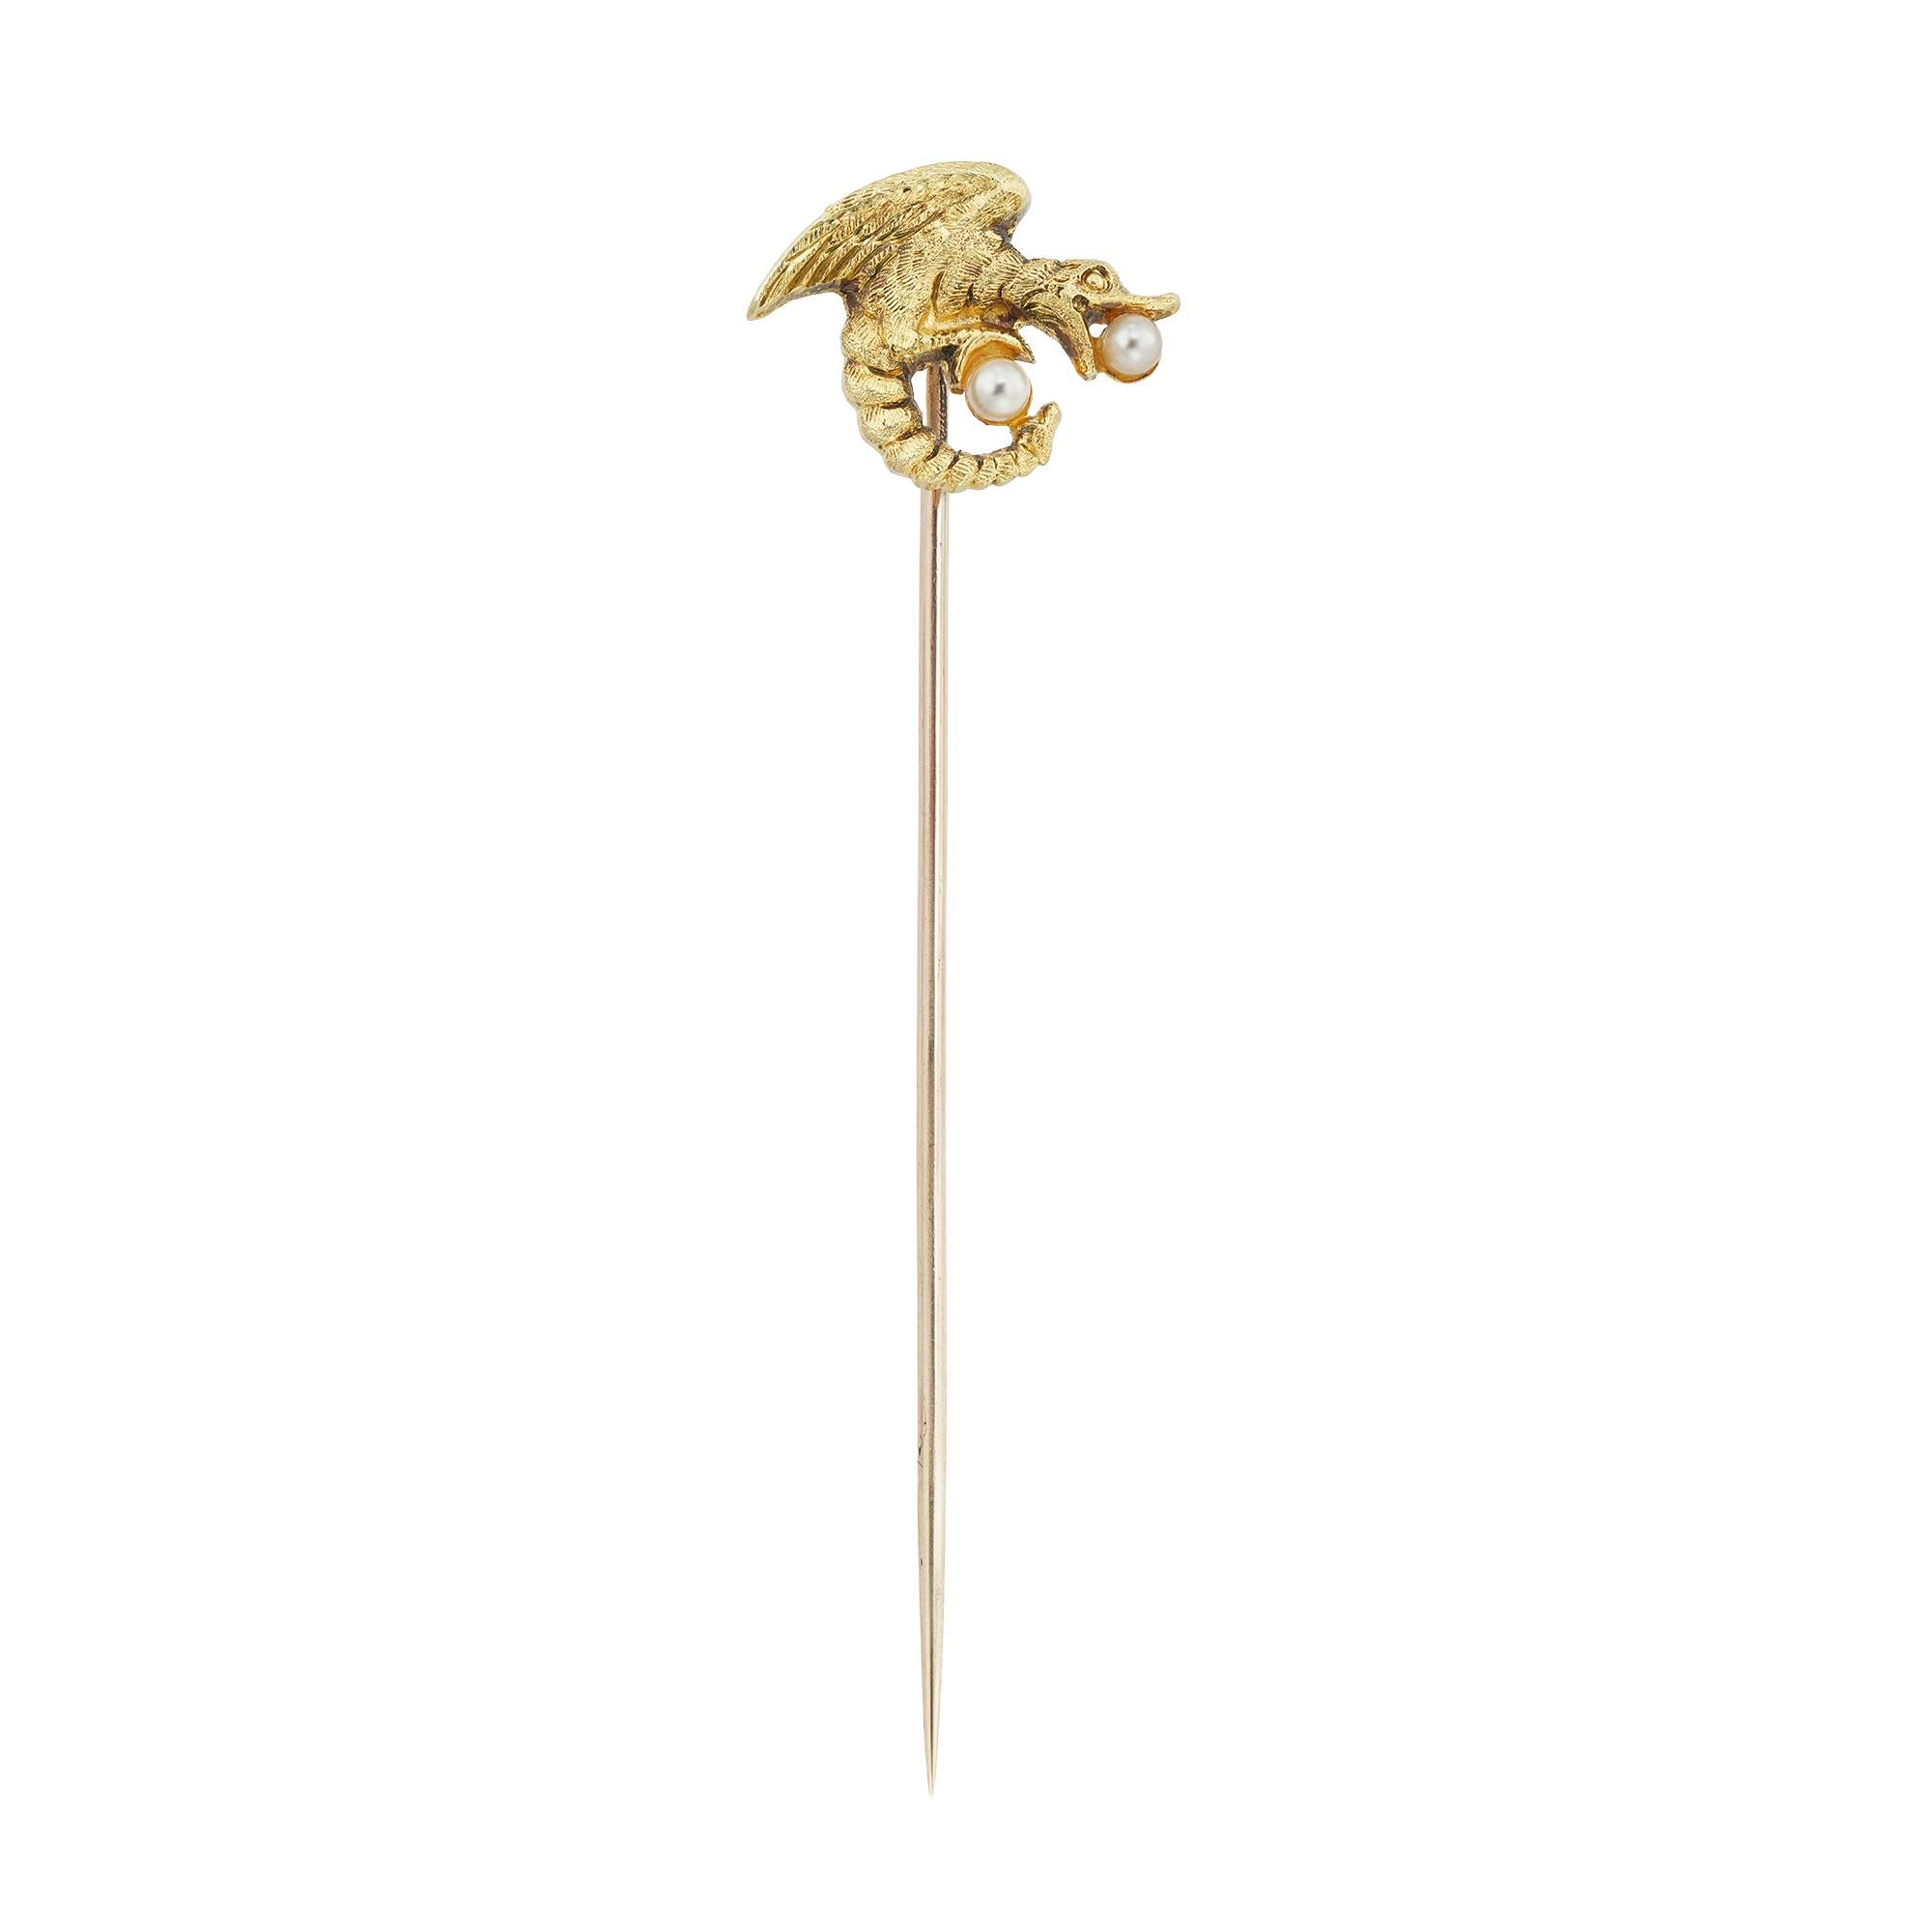 An Art Nouveau gold stick pin, depicting a dragon holding one round seed pearl in its jaws and another seed pearl in its claws, circa 1890, the jewelled part measuring approximately 1.1x1.45cm, the pin measuring 5.5cm long, gross weight 1.2